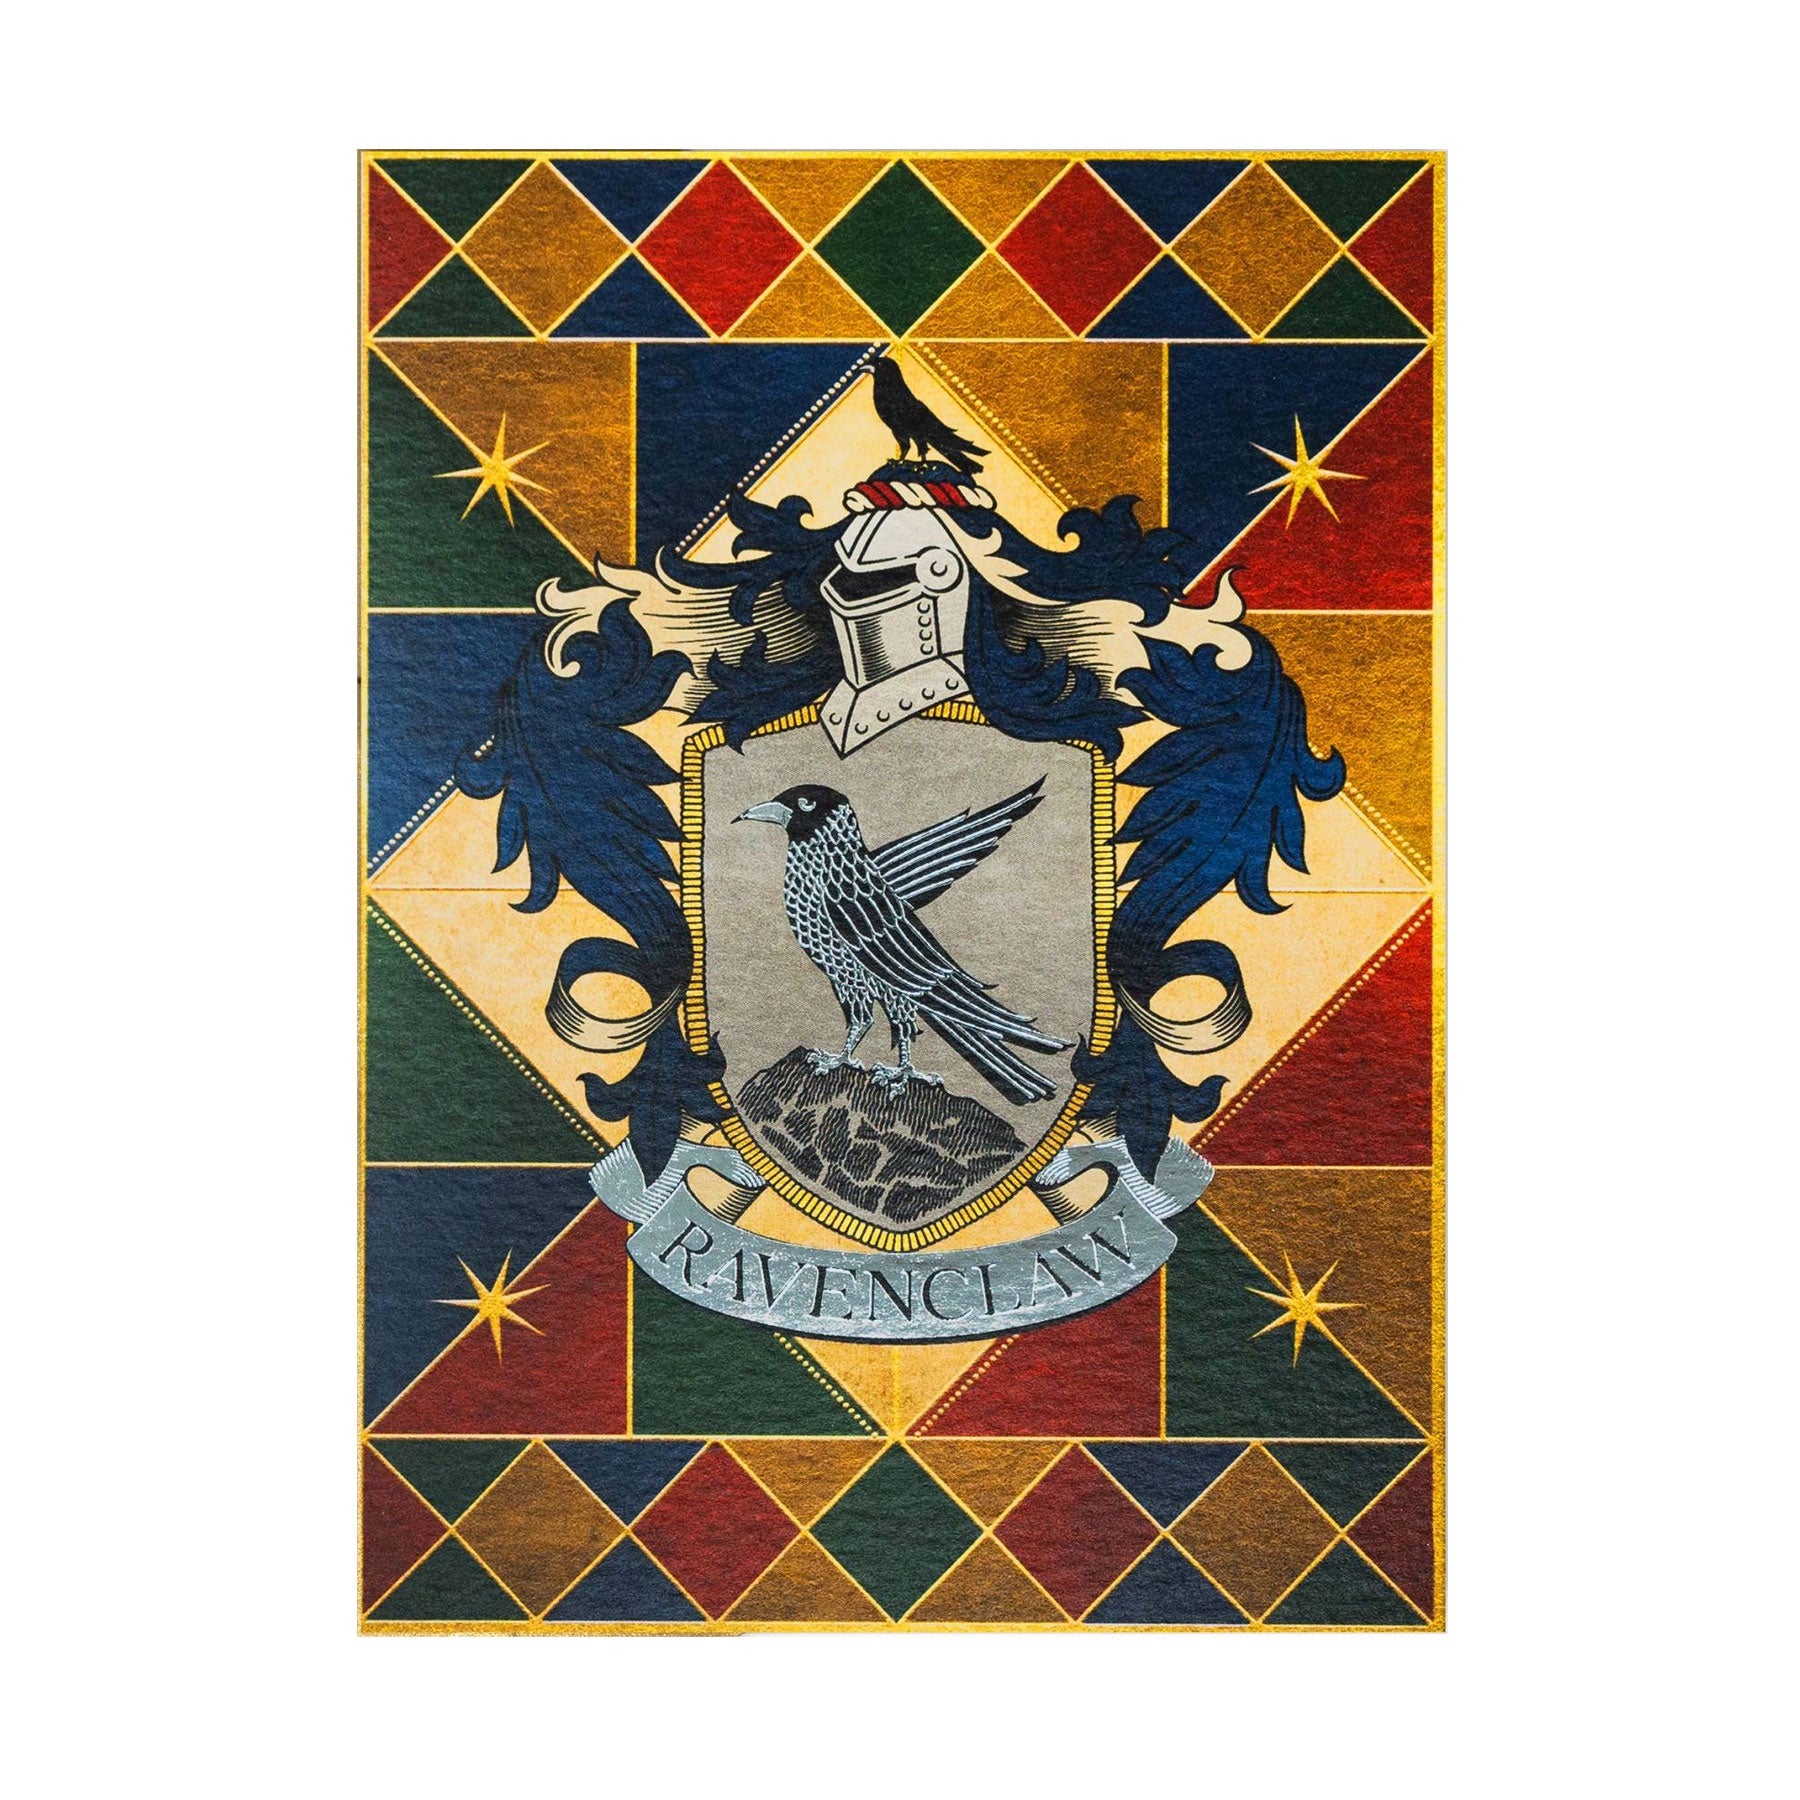 Ravenclaw™ Crest Iron-On Patch